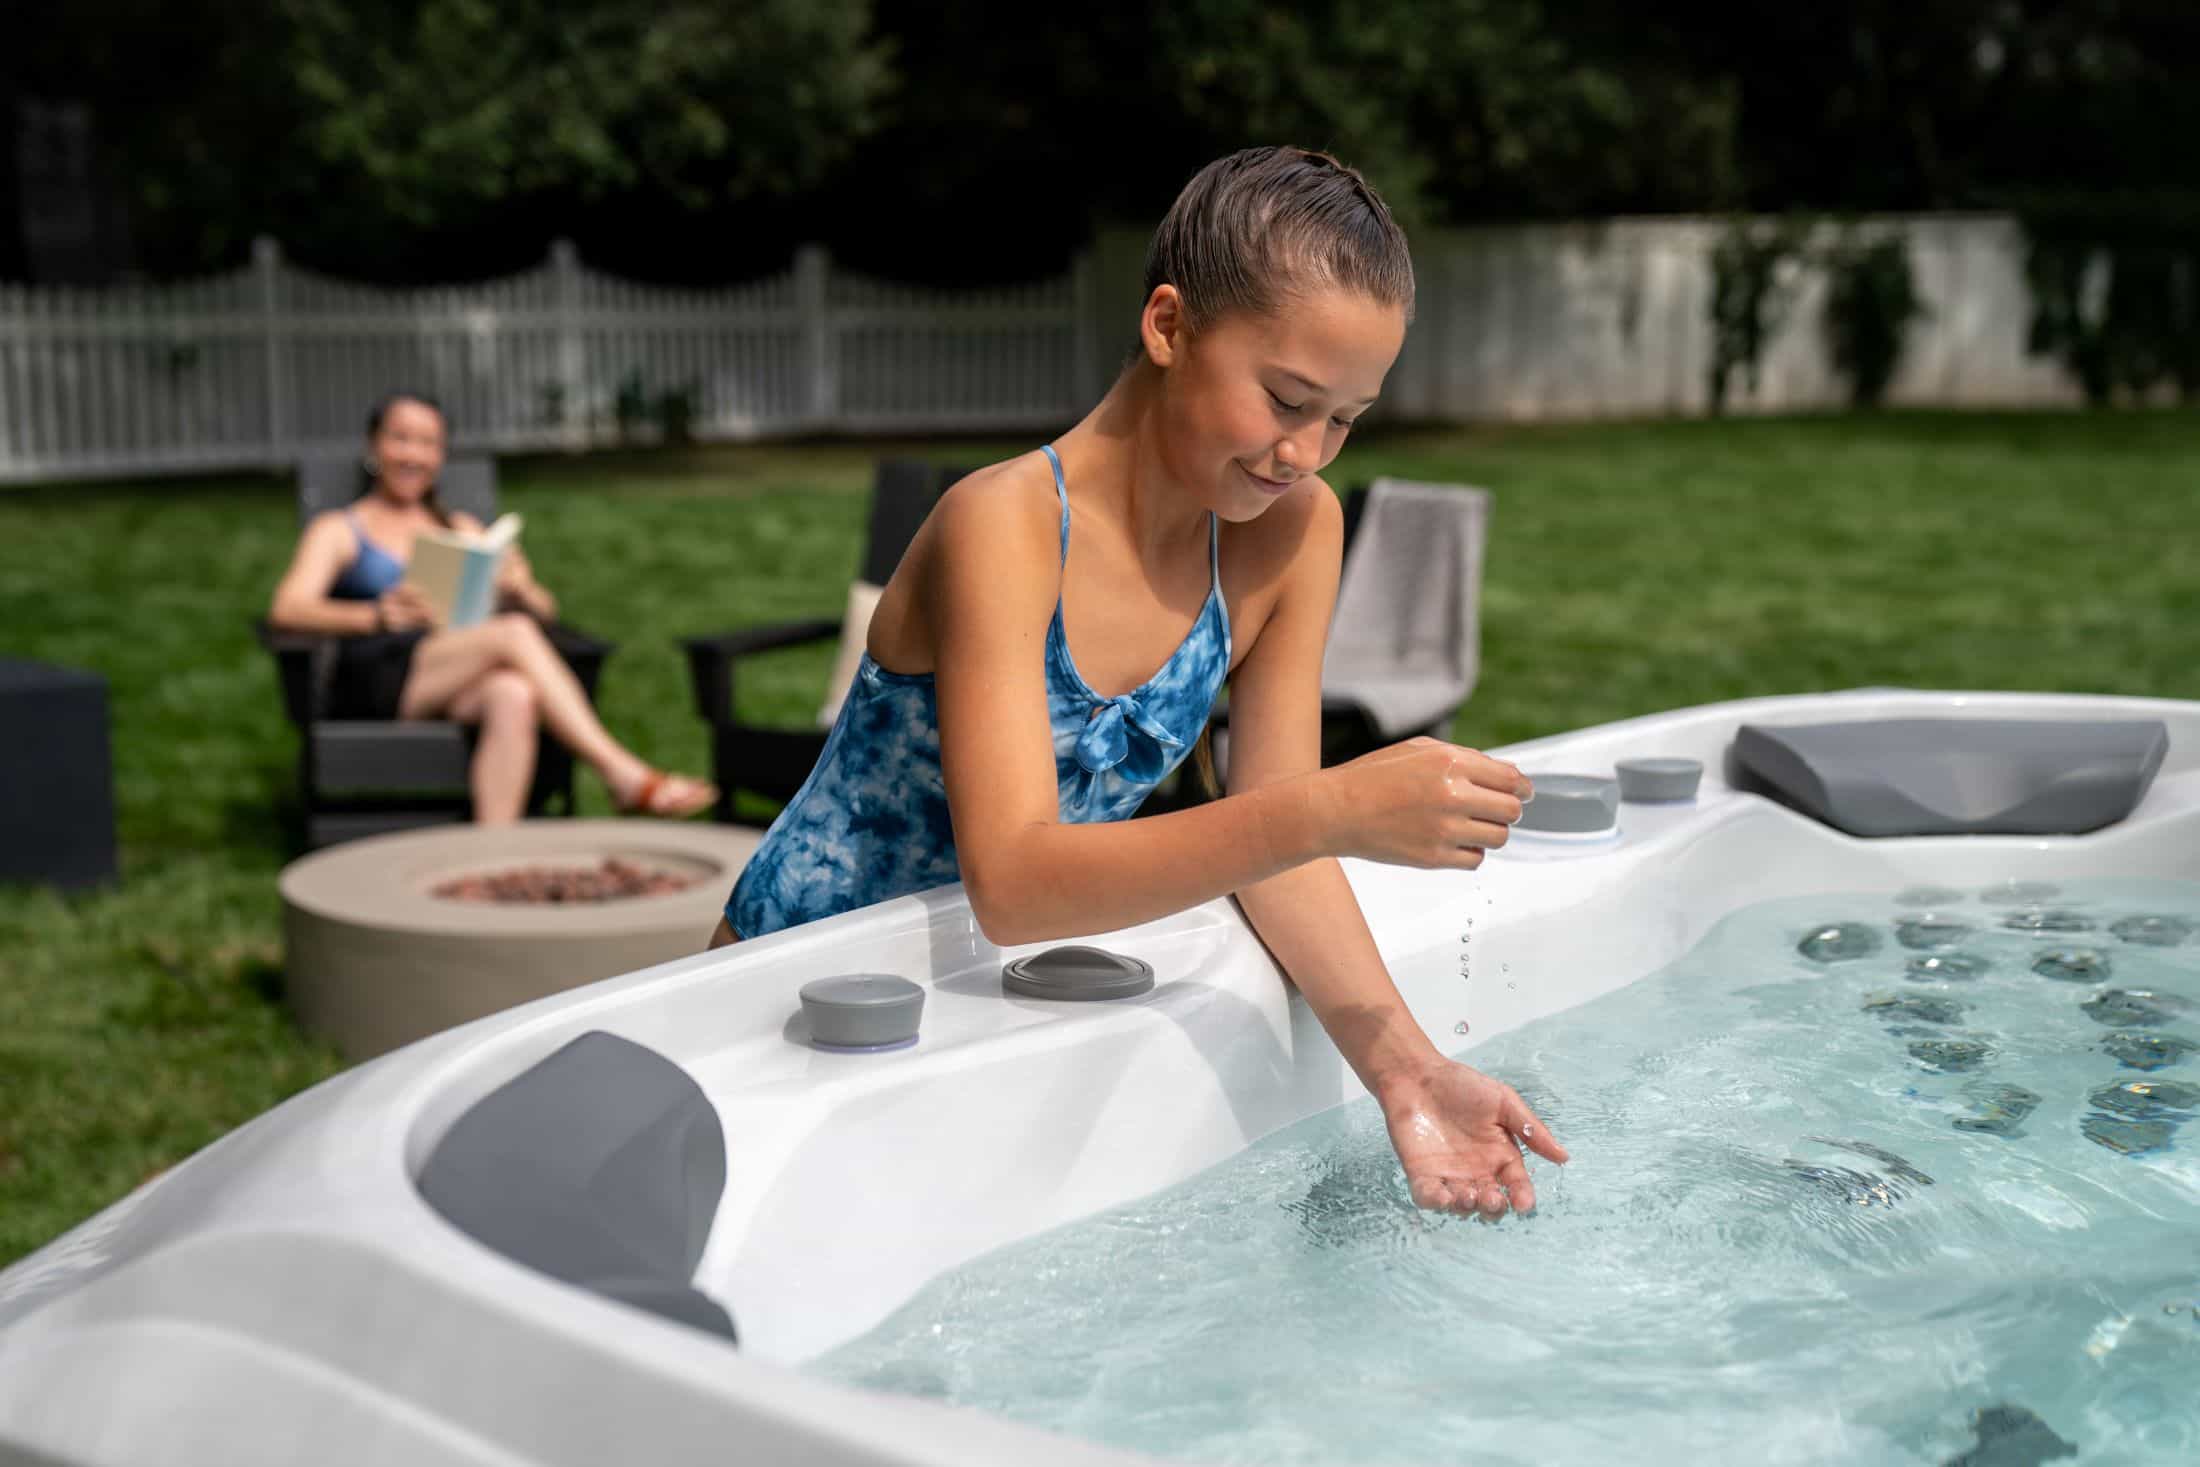 Find the hot tub supplies you need at Mastercraft.